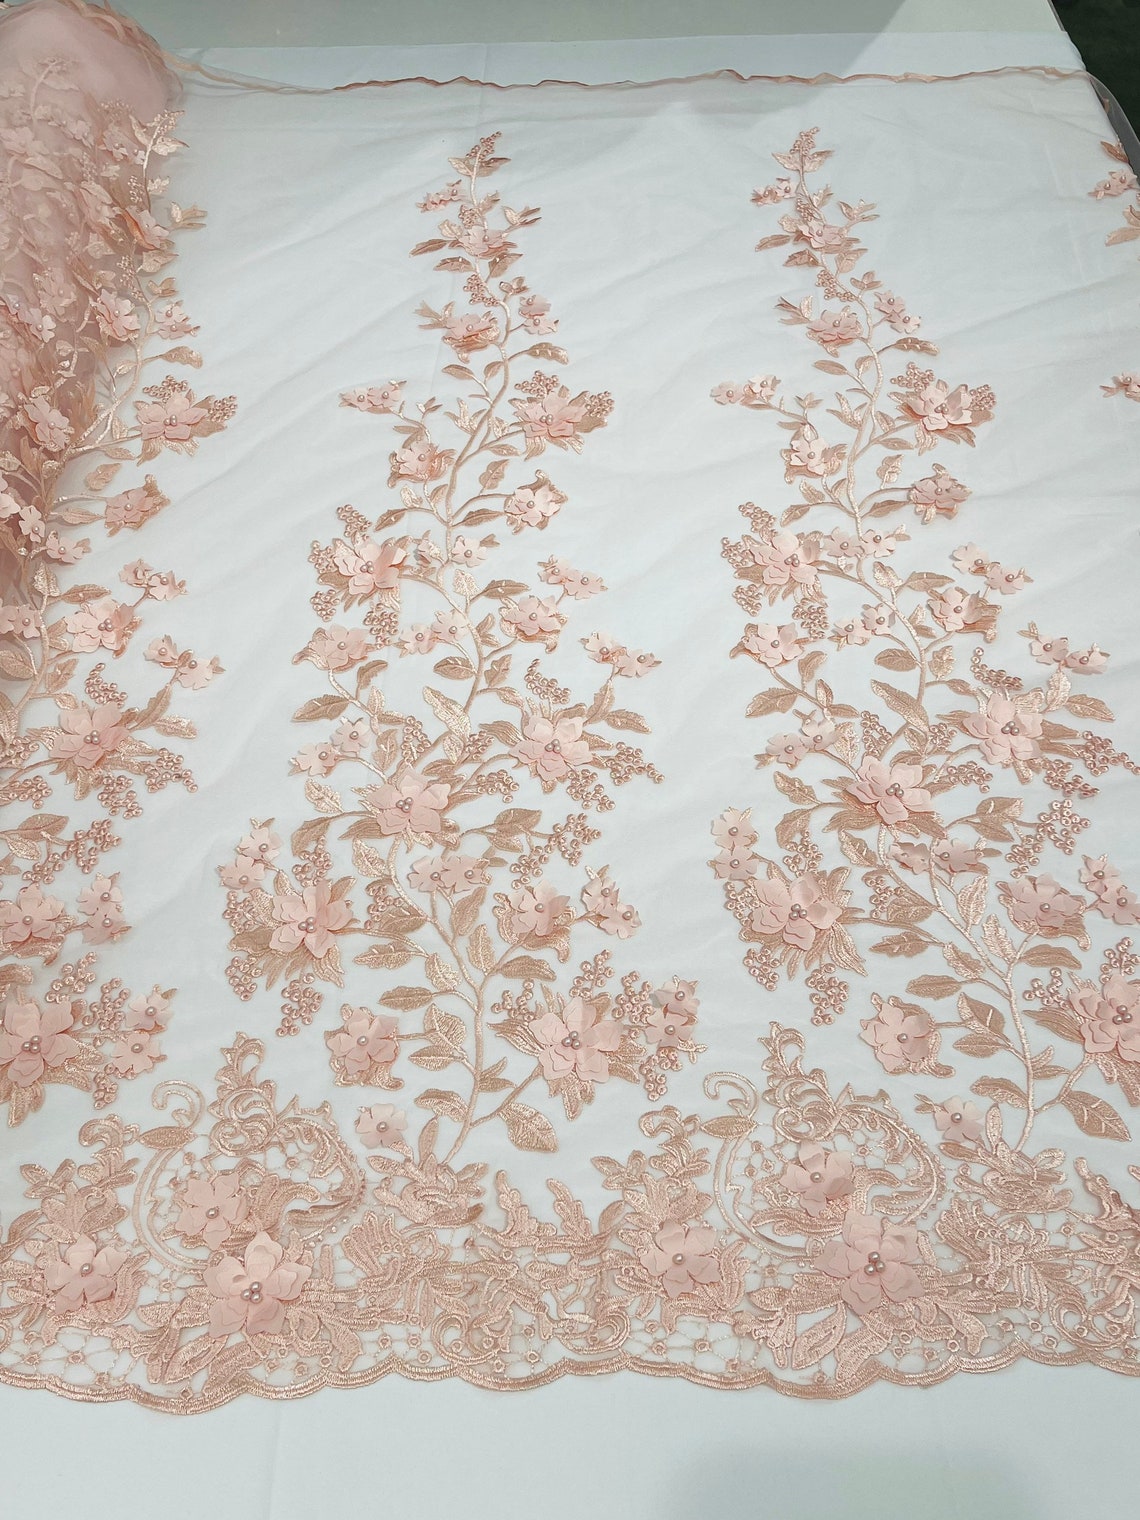 3D Floral Princess Fabric - Blush - Embroidered Floral Lace Fabric with 3D Flowers By Yard